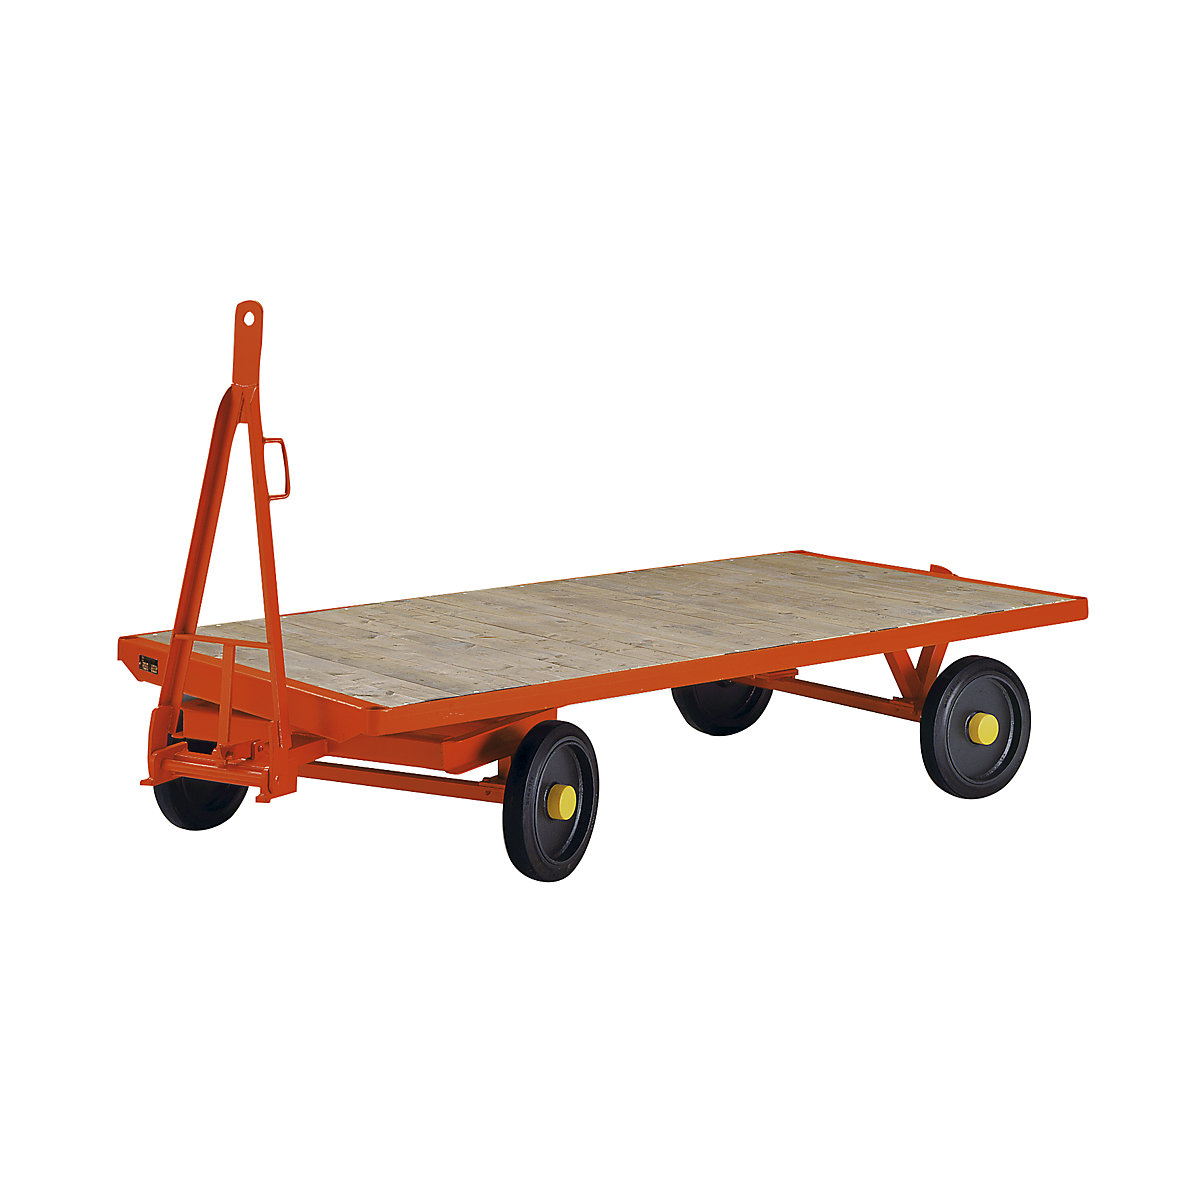 Trailer, 2-wheel turntable steering, max. load 3 t, platform 2.0 x 1.0 m, solid rubber tyres